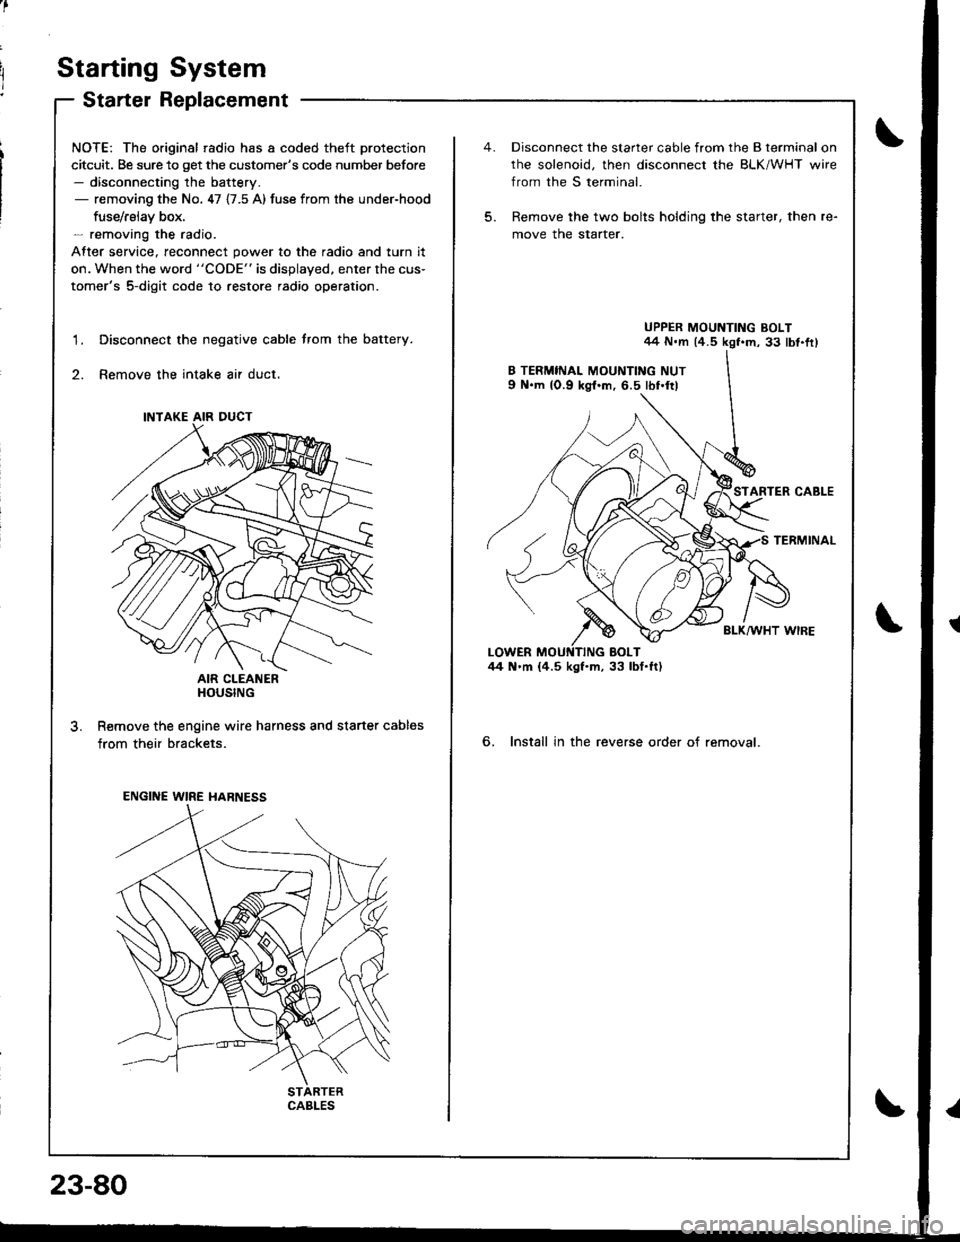 HONDA INTEGRA 1998 4.G User Guide Starting System
Starter Replacement
NOTE: The original radio has a coded theft protection
citcuit. Be sure to get the customers code number before- disconnecting the battery.- removing the No. 47 {7.